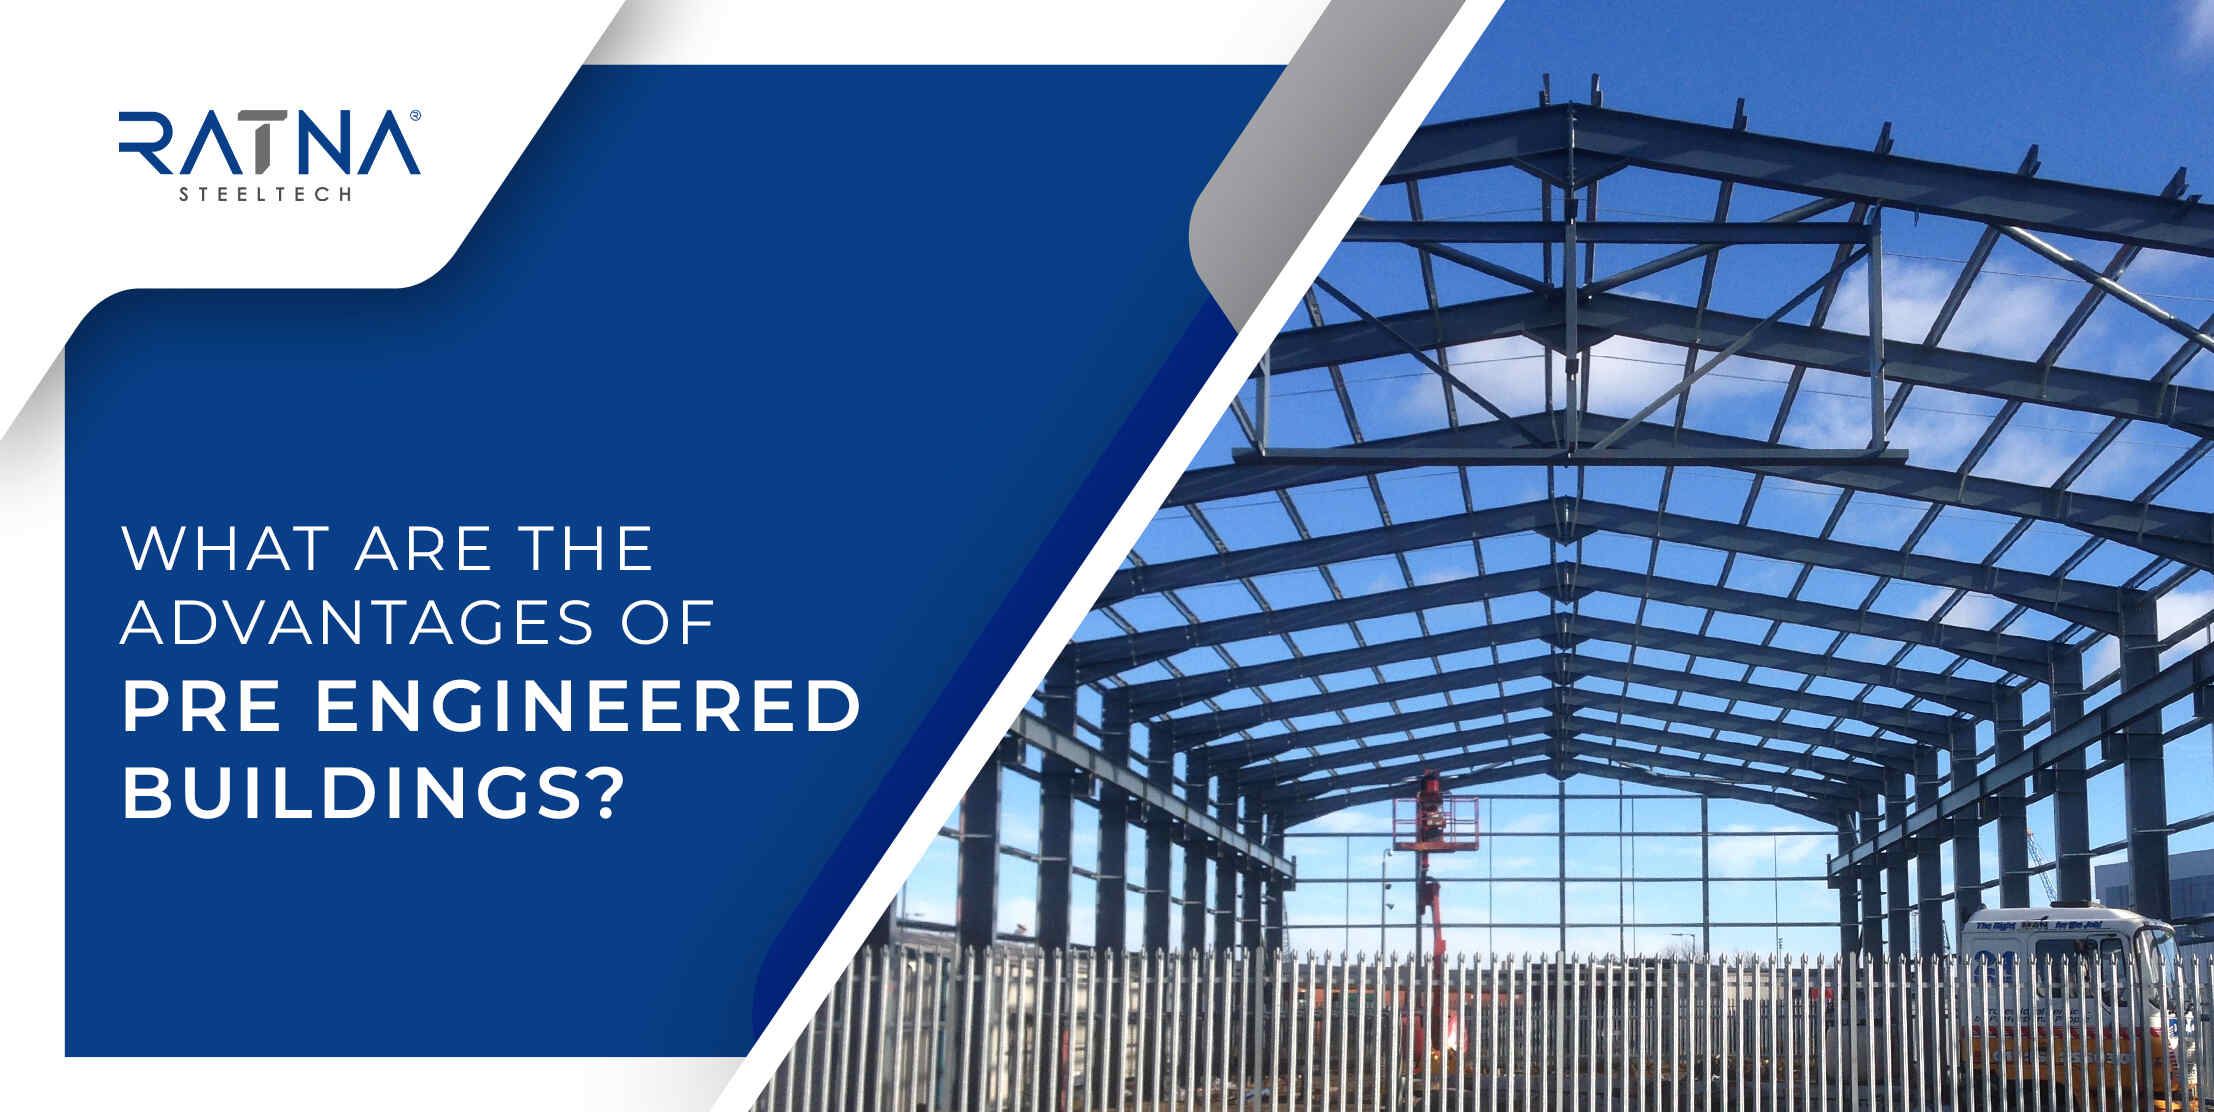 Advantages of Pre-engineered Buildings